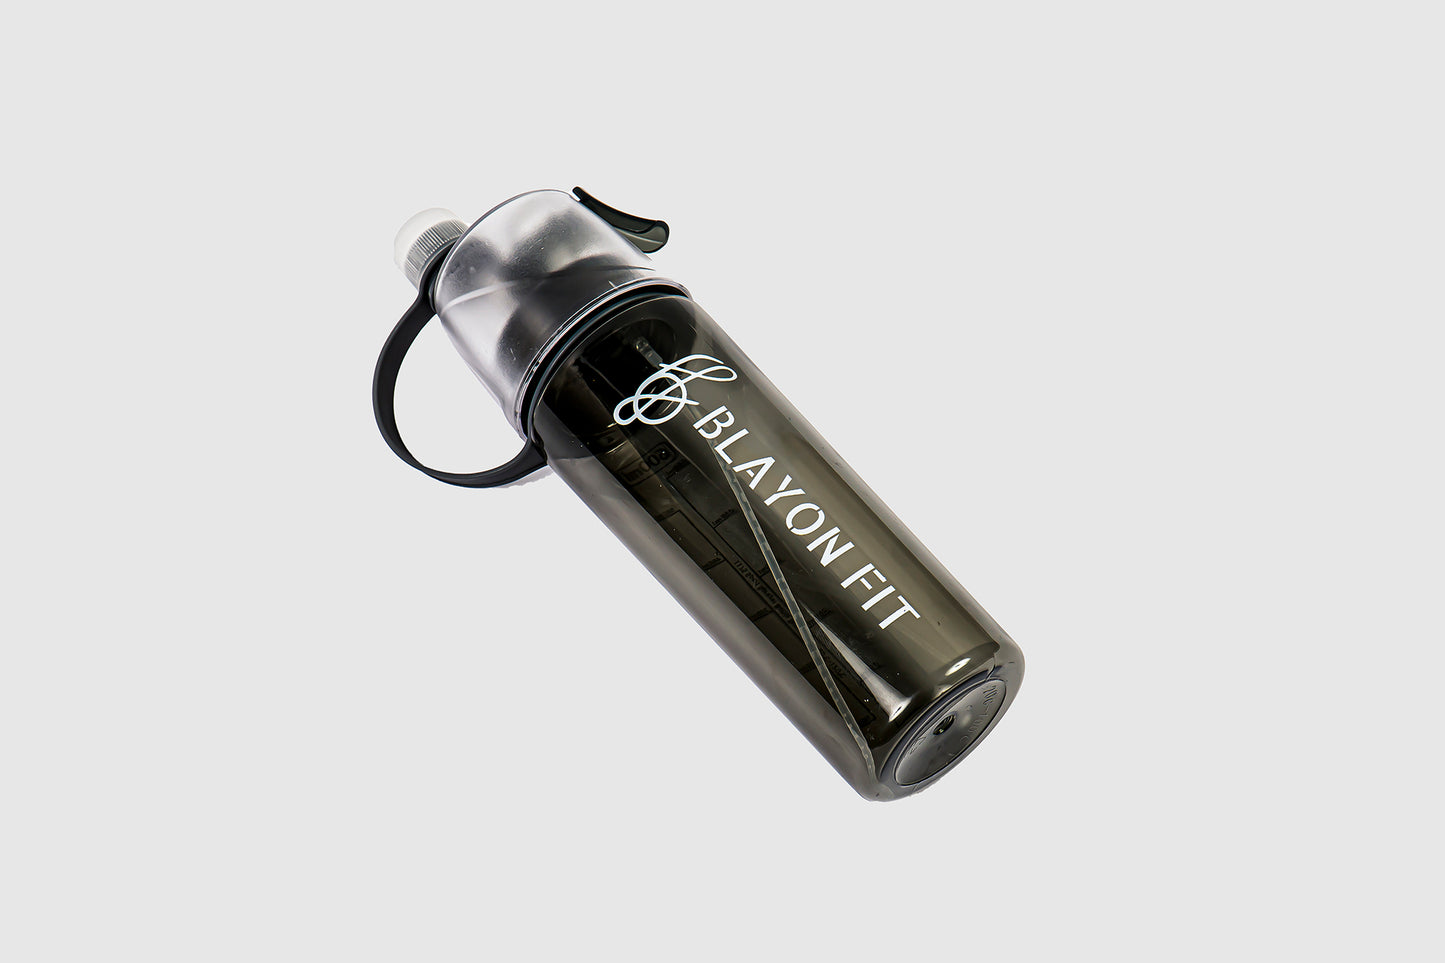 Our Water bottle can spray water directly on your face to get refreshed and energized especially during an intense workout and exercise at the gym.